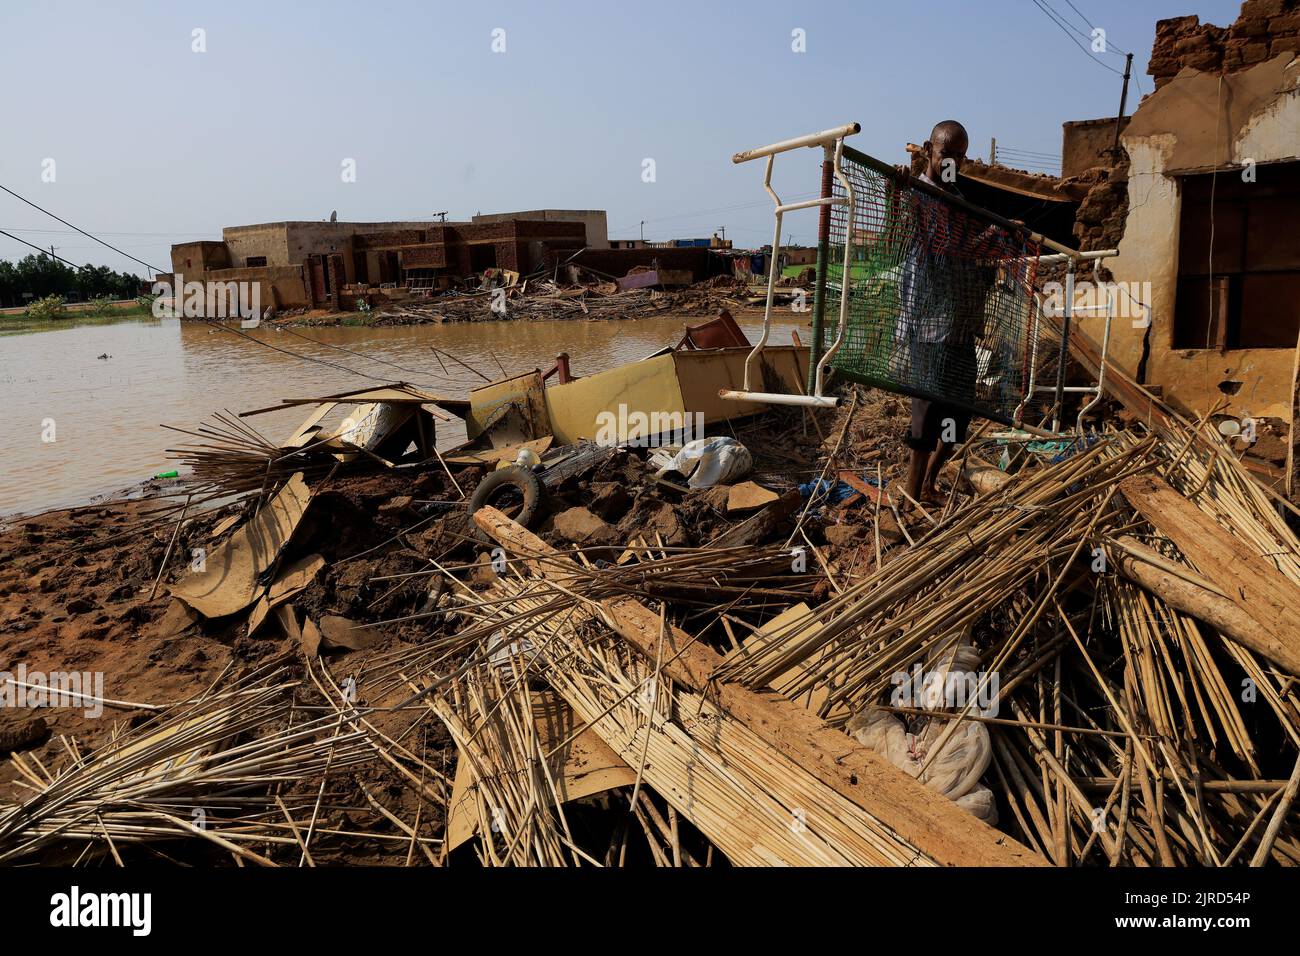 A man collects his belongings after sustaining water damage to his house during floods in Al-Managil locality, in Jazeera State, Sudan August 23, 2022. REUTERS/Mohamed Nureldin Abdallah Stock Photo